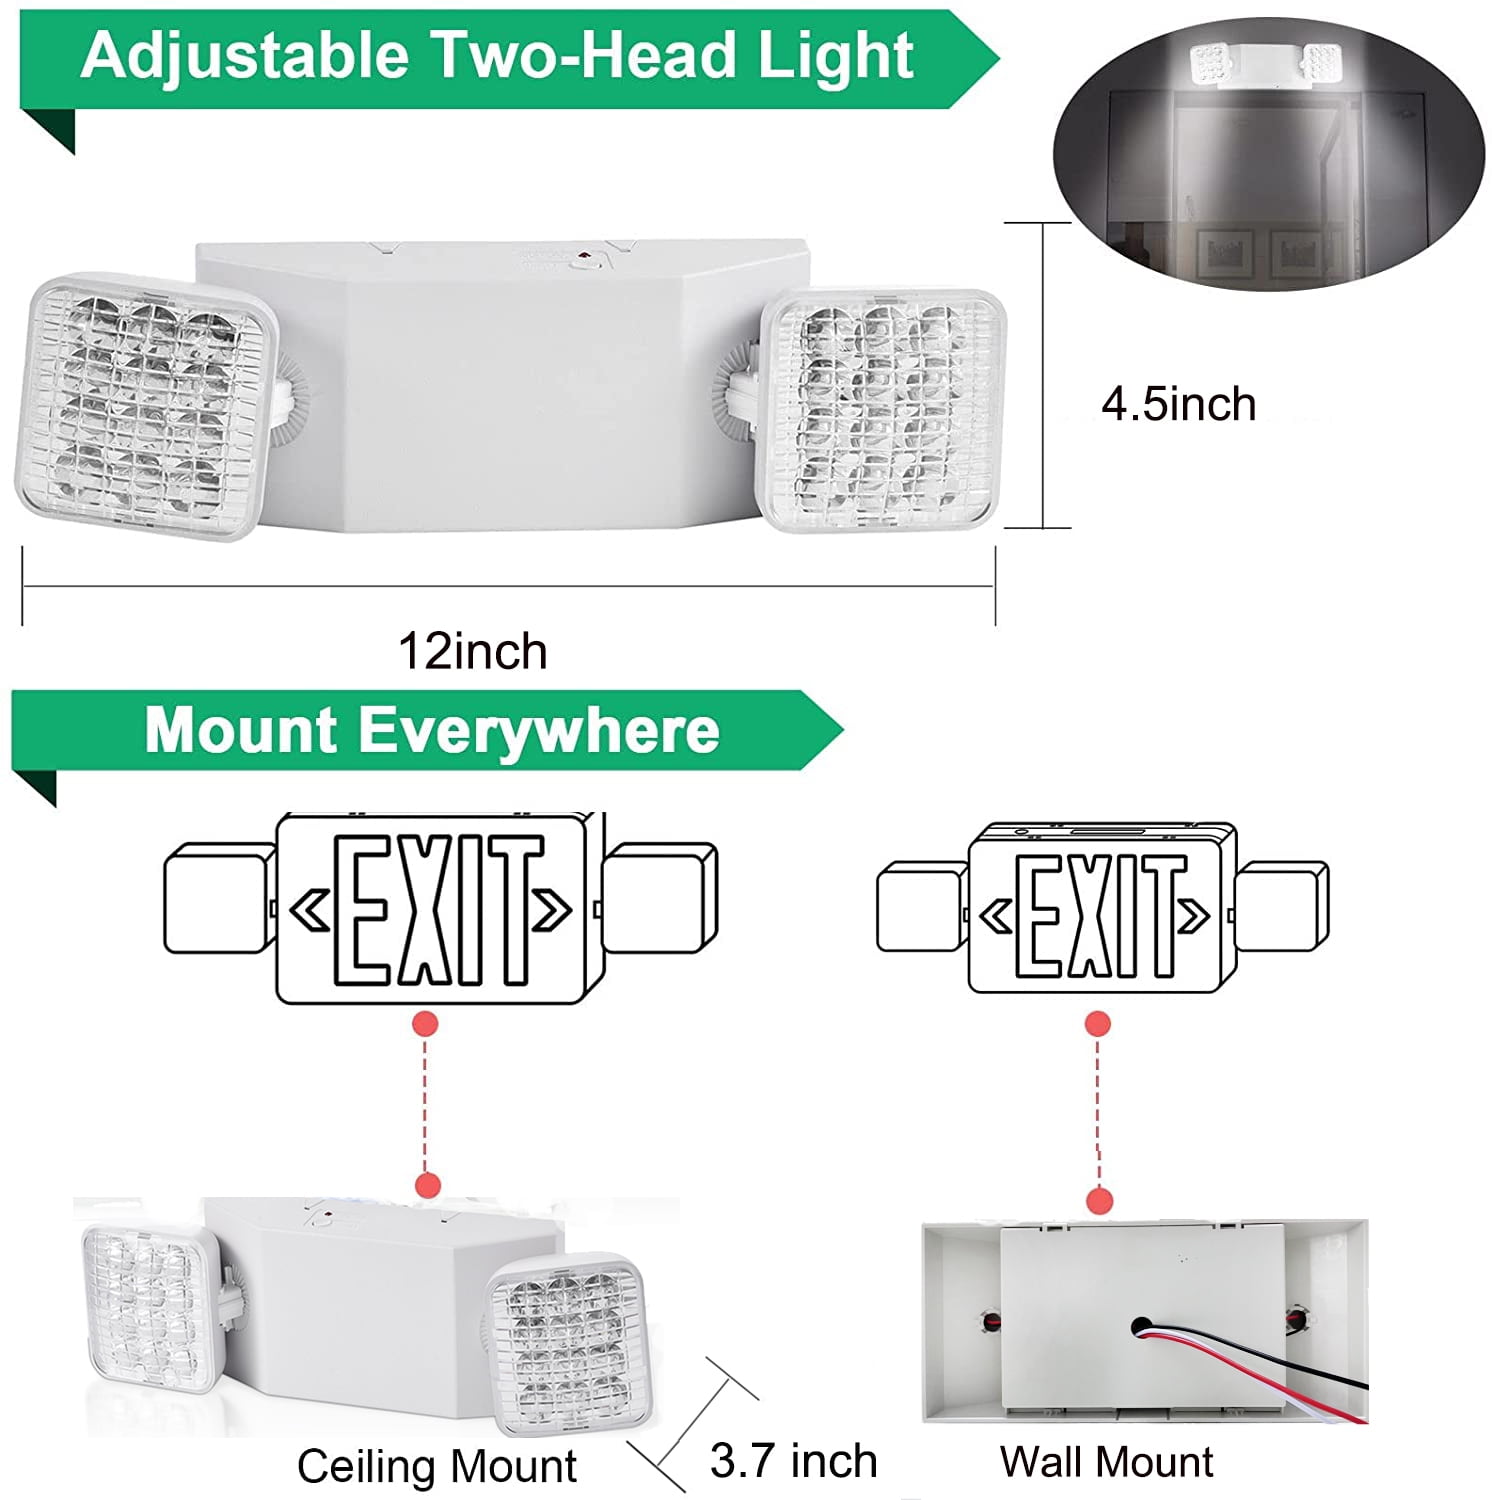 12W×4 PACK LED Intelligent Charging Emergency Lights To Prevent Power Outage